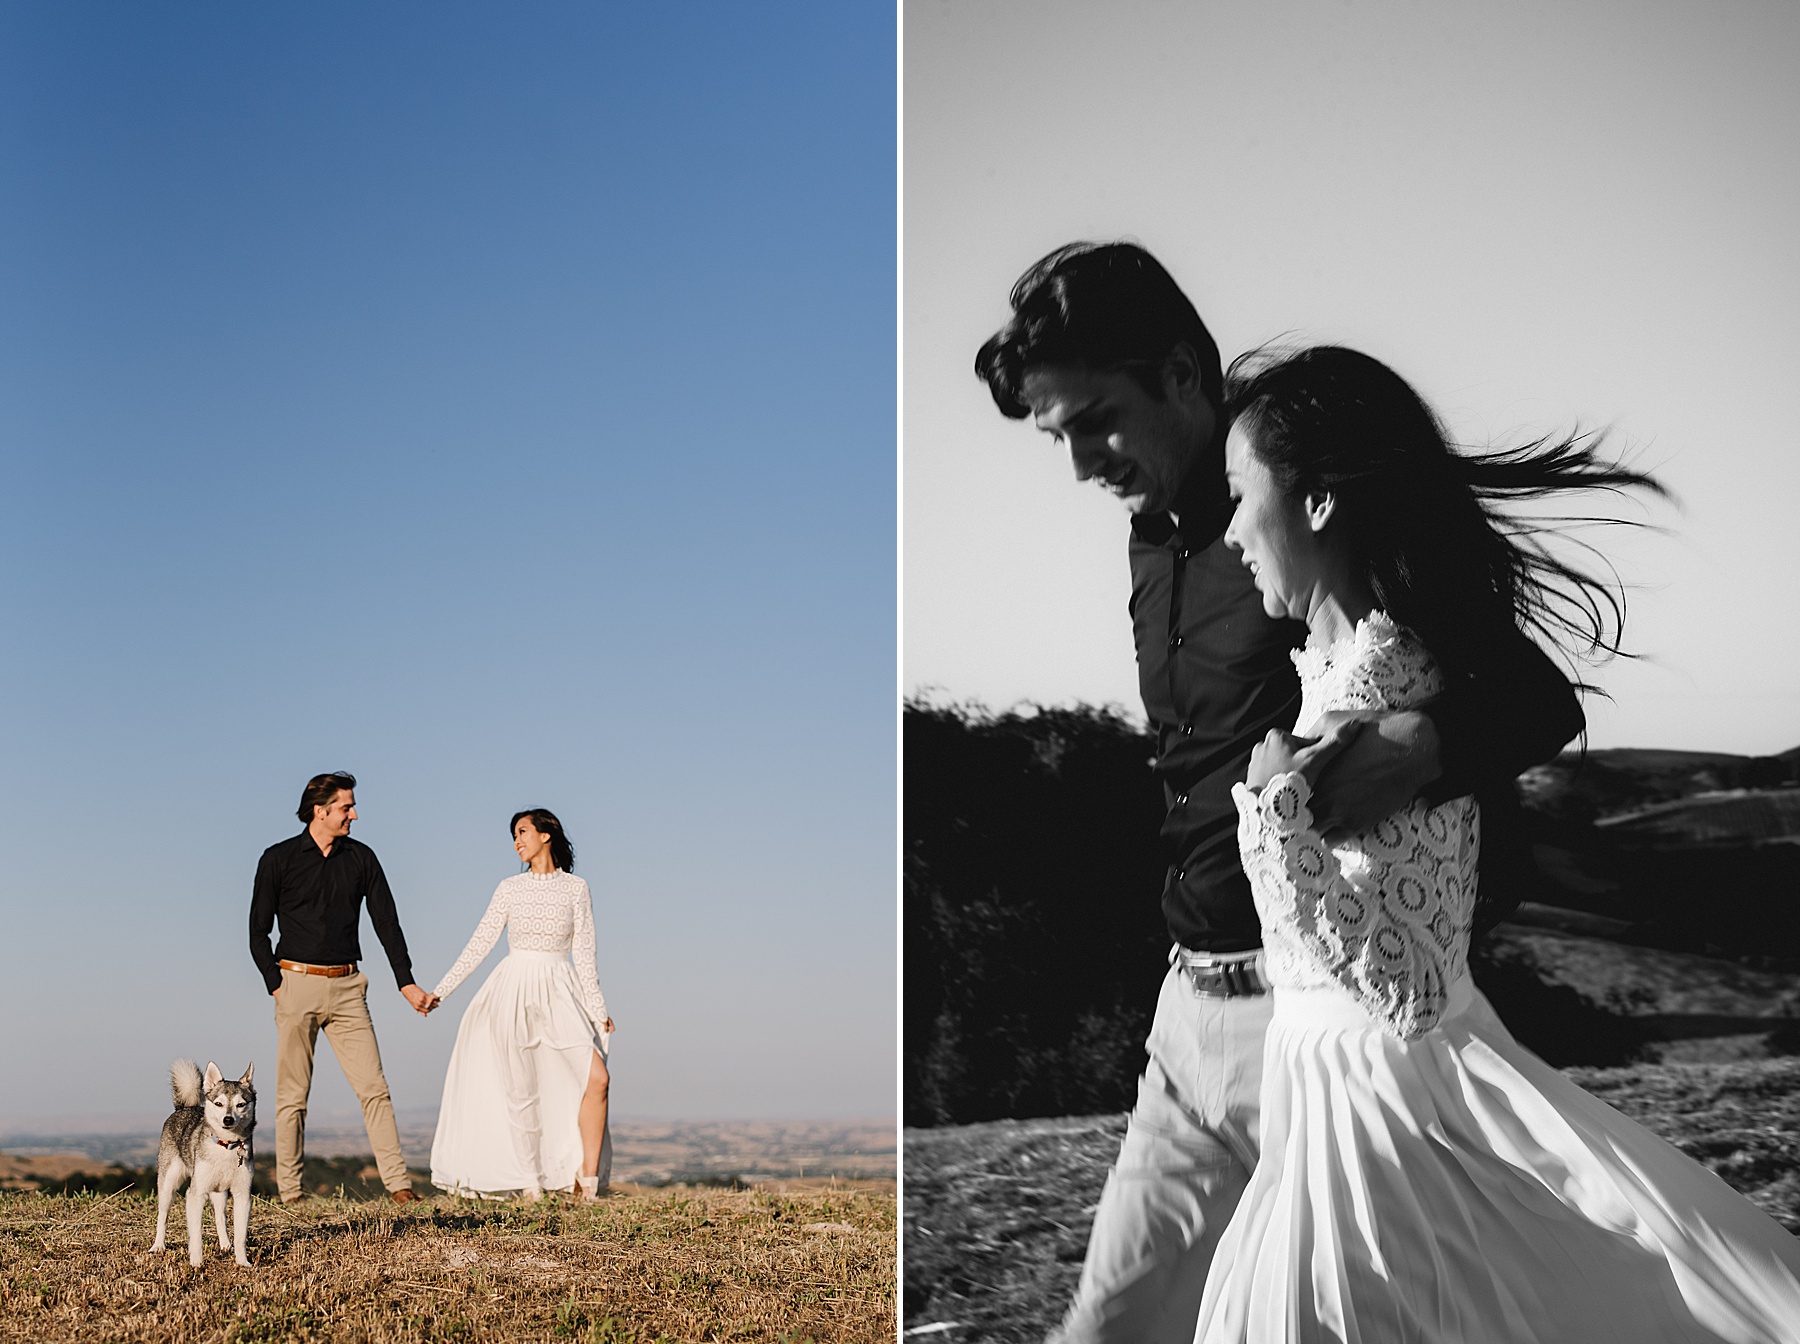 Nikkles Photographer, SLO Wedding Photographer, shares inspiration for a Law Estate Winery Engagement Session in Paso Robles, California